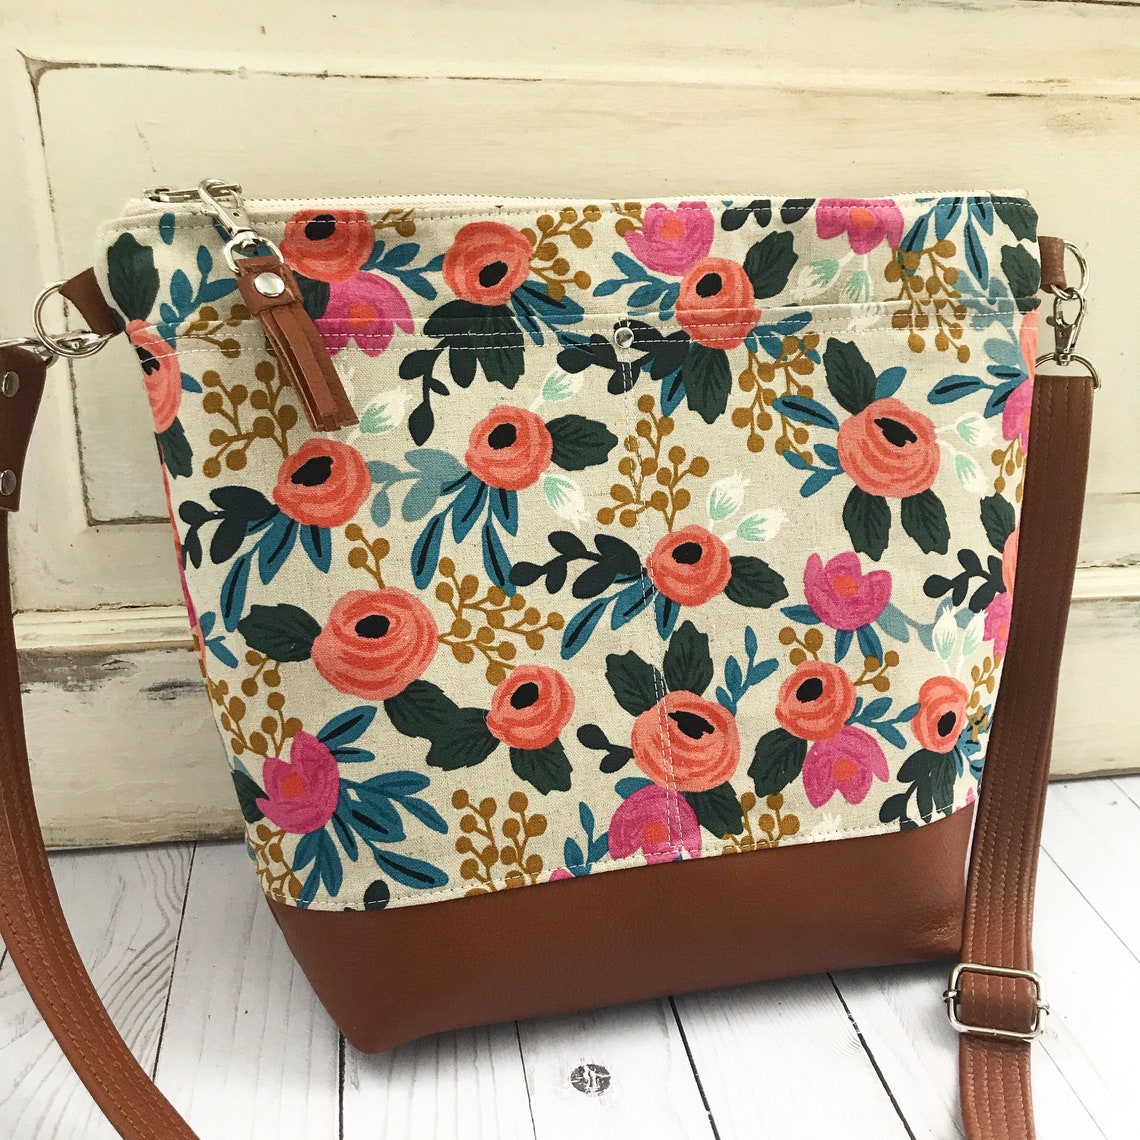 Rifle paper co bag floral crossbody bag Rifle paper co | Etsy